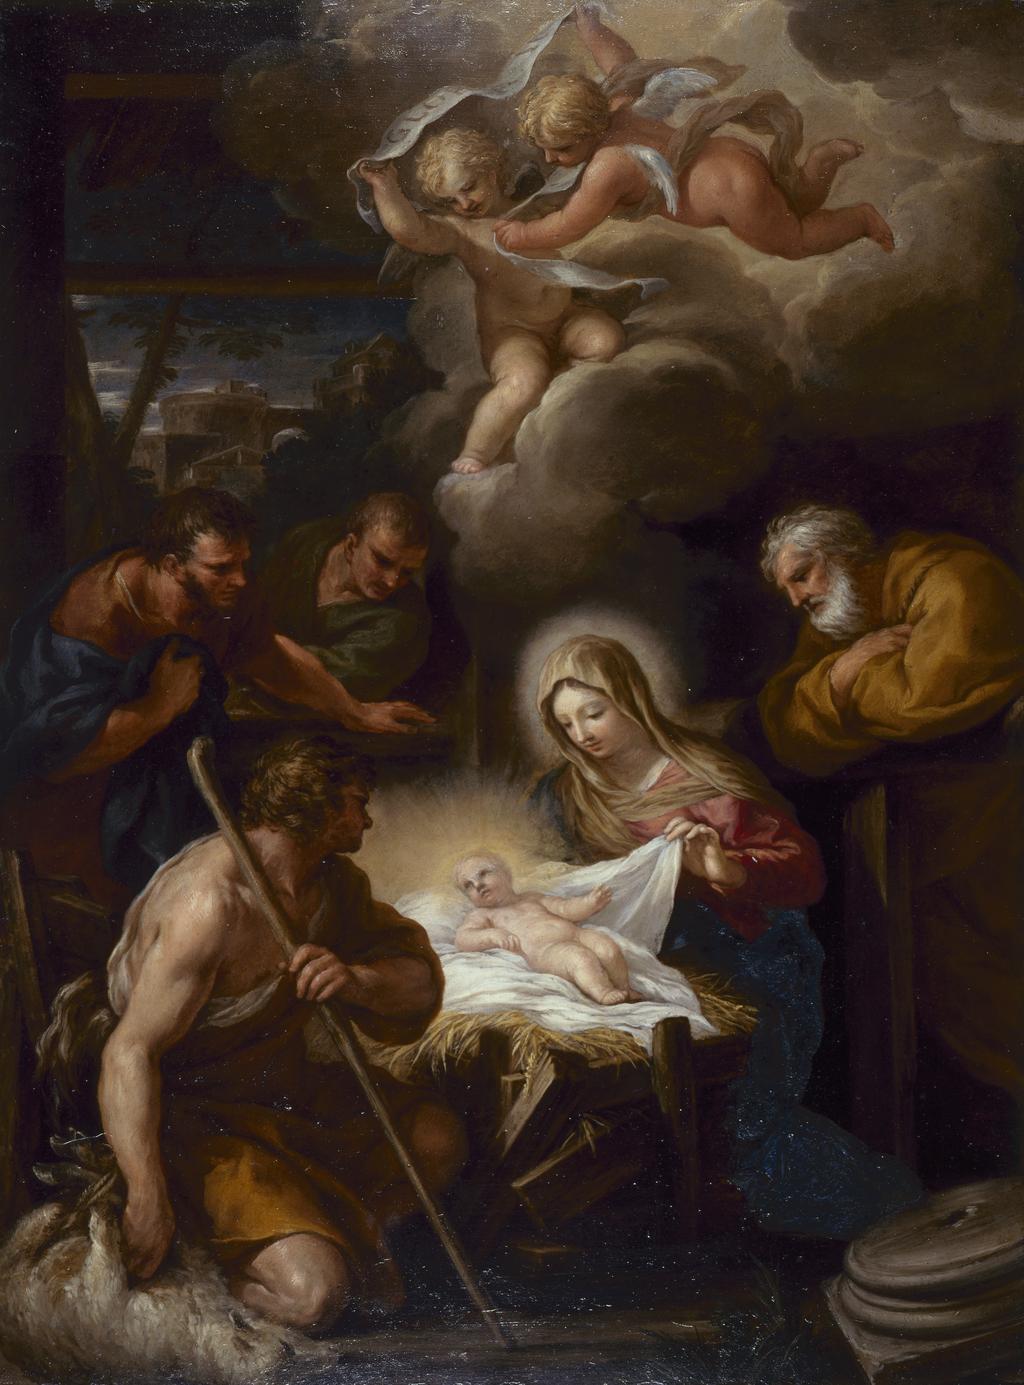 An image of The Adoration of the Shepherds. Ferri, Ciro (Italian, 1634?-1689). Signed on the column base: 'Cirus. Ferri'. Oil on copper, height 52.5 cm, width 38.8cm, 1670. Notes: Commissioned by Cardinal Francesco Barberini as a present for the Venetian Ambassador to Rome. Presented by the Trustees of Sir Denis Mahon's Charitable Trust through the Art Fund, 2013